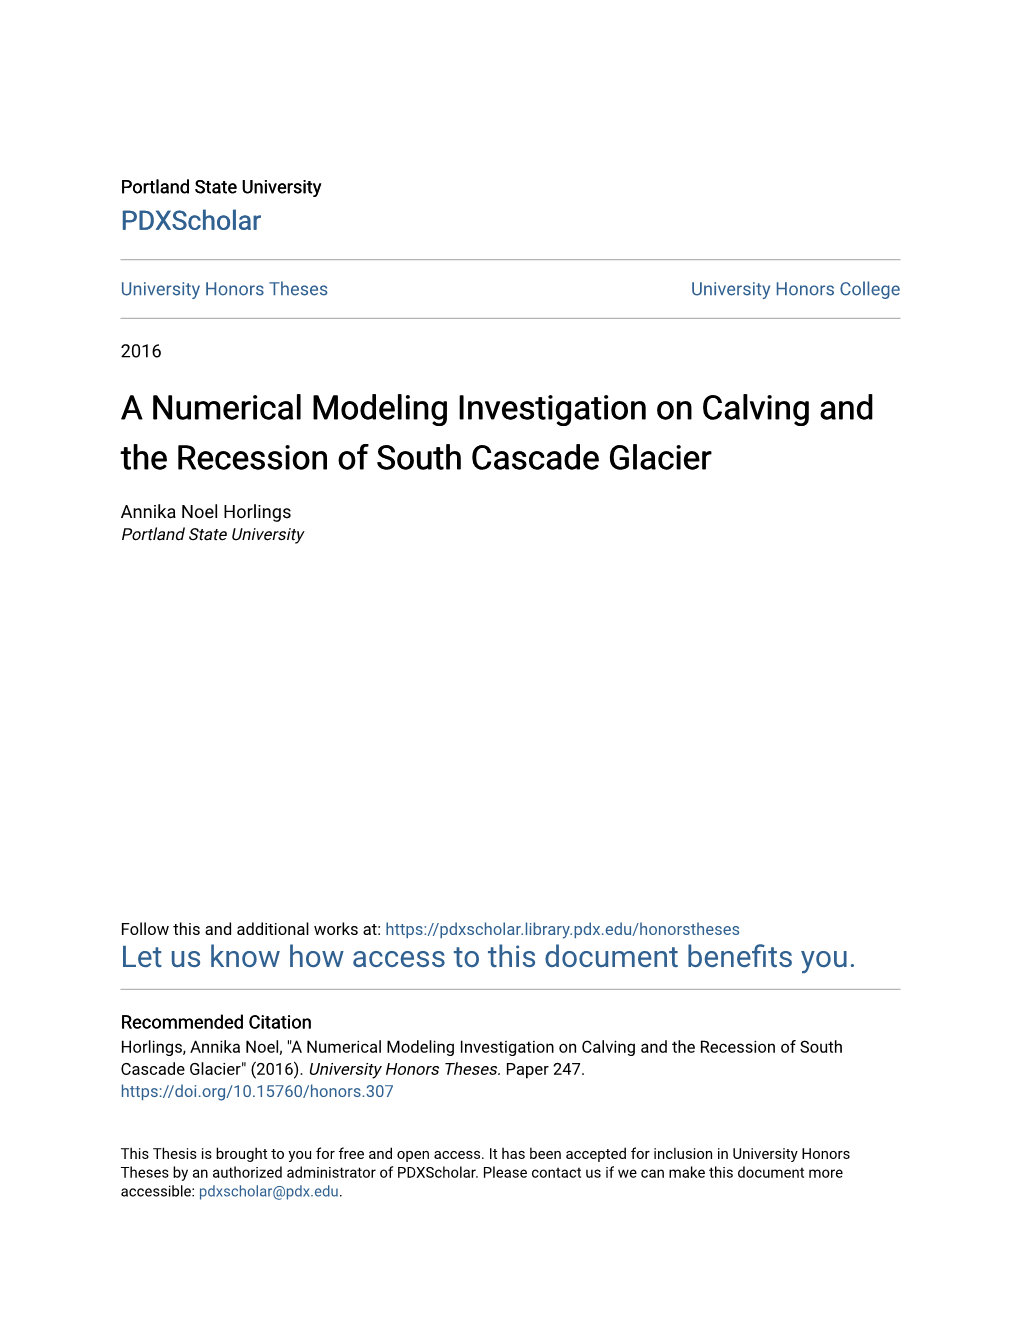 A Numerical Modeling Investigation on Calving and the Recession of South Cascade Glacier